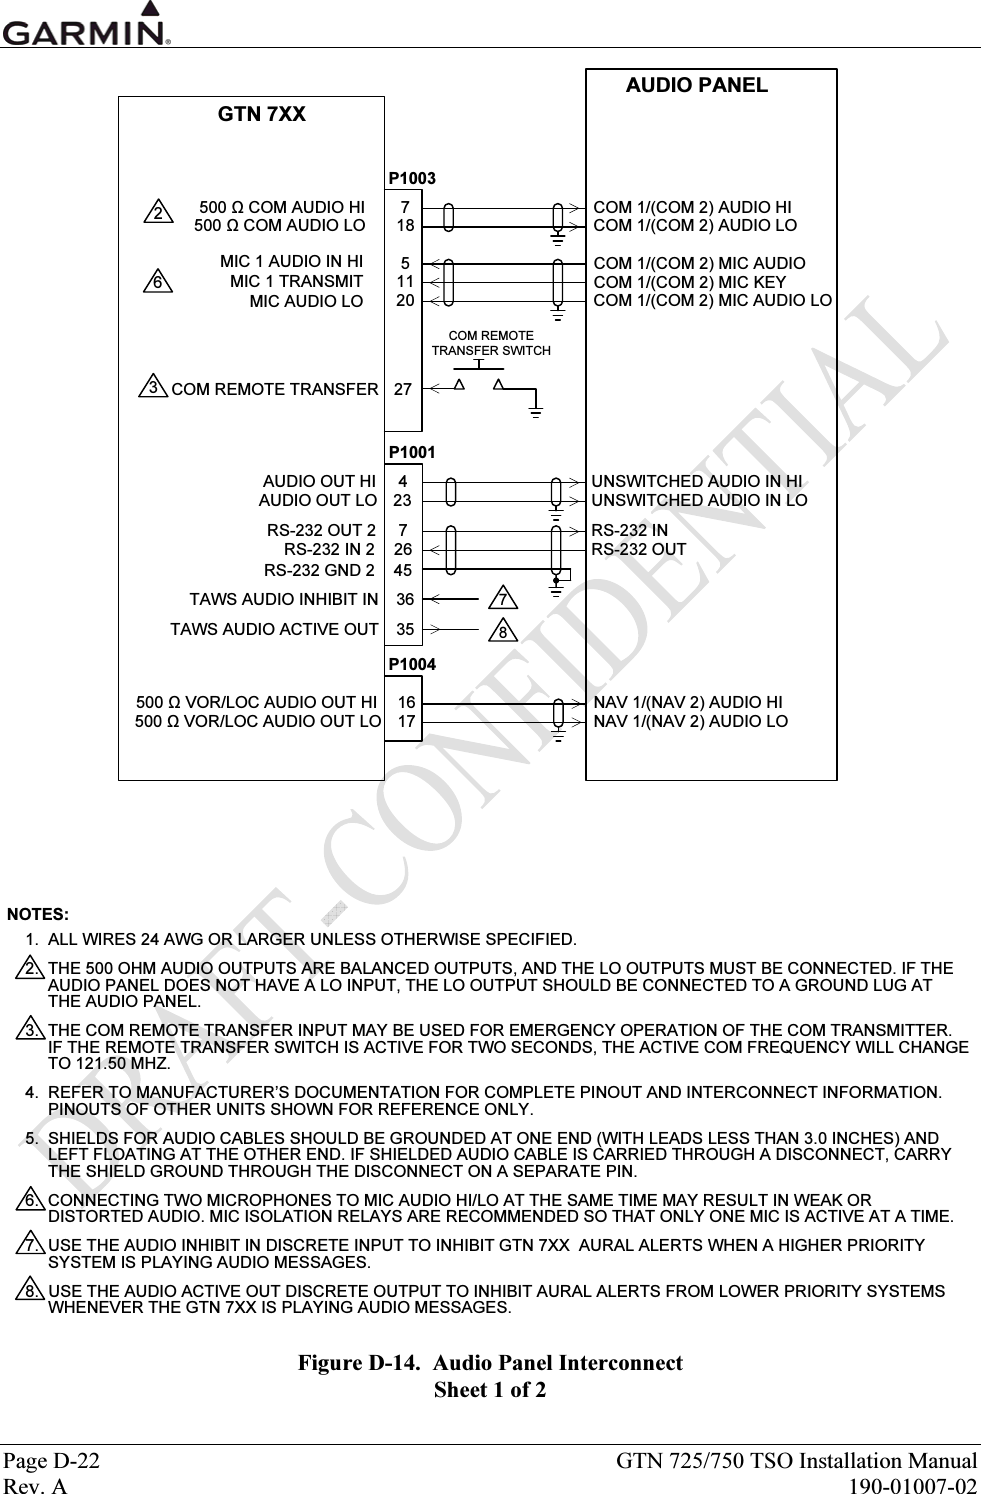  Page D-22  GTN 725/750 TSO Installation Manual Rev. A  190-01007-02 NOTES:1.  ALL WIRES 24 AWG OR LARGER UNLESS OTHERWISE SPECIFIED.2. THE 500 OHM AUDIO OUTPUTS ARE BALANCED OUTPUTS, AND THE LO OUTPUTS MUST BE CONNECTED. IF THE AUDIO PANEL DOES NOT HAVE A LO INPUT, THE LO OUTPUT SHOULD BE CONNECTED TO A GROUND LUG AT THE AUDIO PANEL.3. THE COM REMOTE TRANSFER INPUT MAY BE USED FOR EMERGENCY OPERATION OF THE COM TRANSMITTER. IF THE REMOTE TRANSFER SWITCH IS ACTIVE FOR TWO SECONDS, THE ACTIVE COM FREQUENCY WILL CHANGE TO 121.50 MHZ.4. REFER TO MANUFACTURER’S DOCUMENTATION FOR COMPLETE PINOUT AND INTERCONNECT INFORMATION. PINOUTS OF OTHER UNITS SHOWN FOR REFERENCE ONLY.5. SHIELDS FOR AUDIO CABLES SHOULD BE GROUNDED AT ONE END (WITH LEADS LESS THAN 3.0 INCHES) AND LEFT FLOATING AT THE OTHER END. IF SHIELDED AUDIO CABLE IS CARRIED THROUGH A DISCONNECT, CARRY THE SHIELD GROUND THROUGH THE DISCONNECT ON A SEPARATE PIN.6. CONNECTING TWO MICROPHONES TO MIC AUDIO HI/LO AT THE SAME TIME MAY RESULT IN WEAK OR DISTORTED AUDIO. MIC ISOLATION RELAYS ARE RECOMMENDED SO THAT ONLY ONE MIC IS ACTIVE AT A TIME.7. USE THE AUDIO INHIBIT IN DISCRETE INPUT TO INHIBIT GTN 7XX  AURAL ALERTS WHEN A HIGHER PRIORITY SYSTEM IS PLAYING AUDIO MESSAGES.8.  USE THE AUDIO ACTIVE OUT DISCRETE OUTPUT TO INHIBIT AURAL ALERTS FROM LOWER PRIORITY SYSTEMS WHENEVER THE GTN 7XX IS PLAYING AUDIO MESSAGES.GTN 7XXMIC 1 AUDIO IN HIMIC 1 TRANSMITMIC AUDIO LO500 Ω COM AUDIO LO500 Ω COM AUDIO HI500 Ω VOR/LOC AUDIO OUT HI500 Ω VOR/LOC AUDIO OUT LO71851120COM REMOTE TRANSFER SWITCH27COM REMOTE TRANSFERP1003P10041617236P1001AUDIO OUT HIAUDIO OUT LO423RS-232 OUT 2RS-232 IN 2726RS-232 GND 2 4535TAWS AUDIO ACTIVE OUT36TAWS AUDIO INHIBIT IN 78AUDIO PANELCOM 1/(COM 2) MIC AUDIOCOM 1/(COM 2) MIC KEYCOM 1/(COM 2) AUDIO HICOM 1/(COM 2) AUDIO LOCOM 1/(COM 2) MIC AUDIO LONAV 1/(NAV 2) AUDIO HINAV 1/(NAV 2) AUDIO LOUNSWITCHED AUDIO IN HIUNSWITCHED AUDIO IN LORS-232 INRS-232 OUT Figure D-14.  Audio Panel Interconnect Sheet 1 of 2 